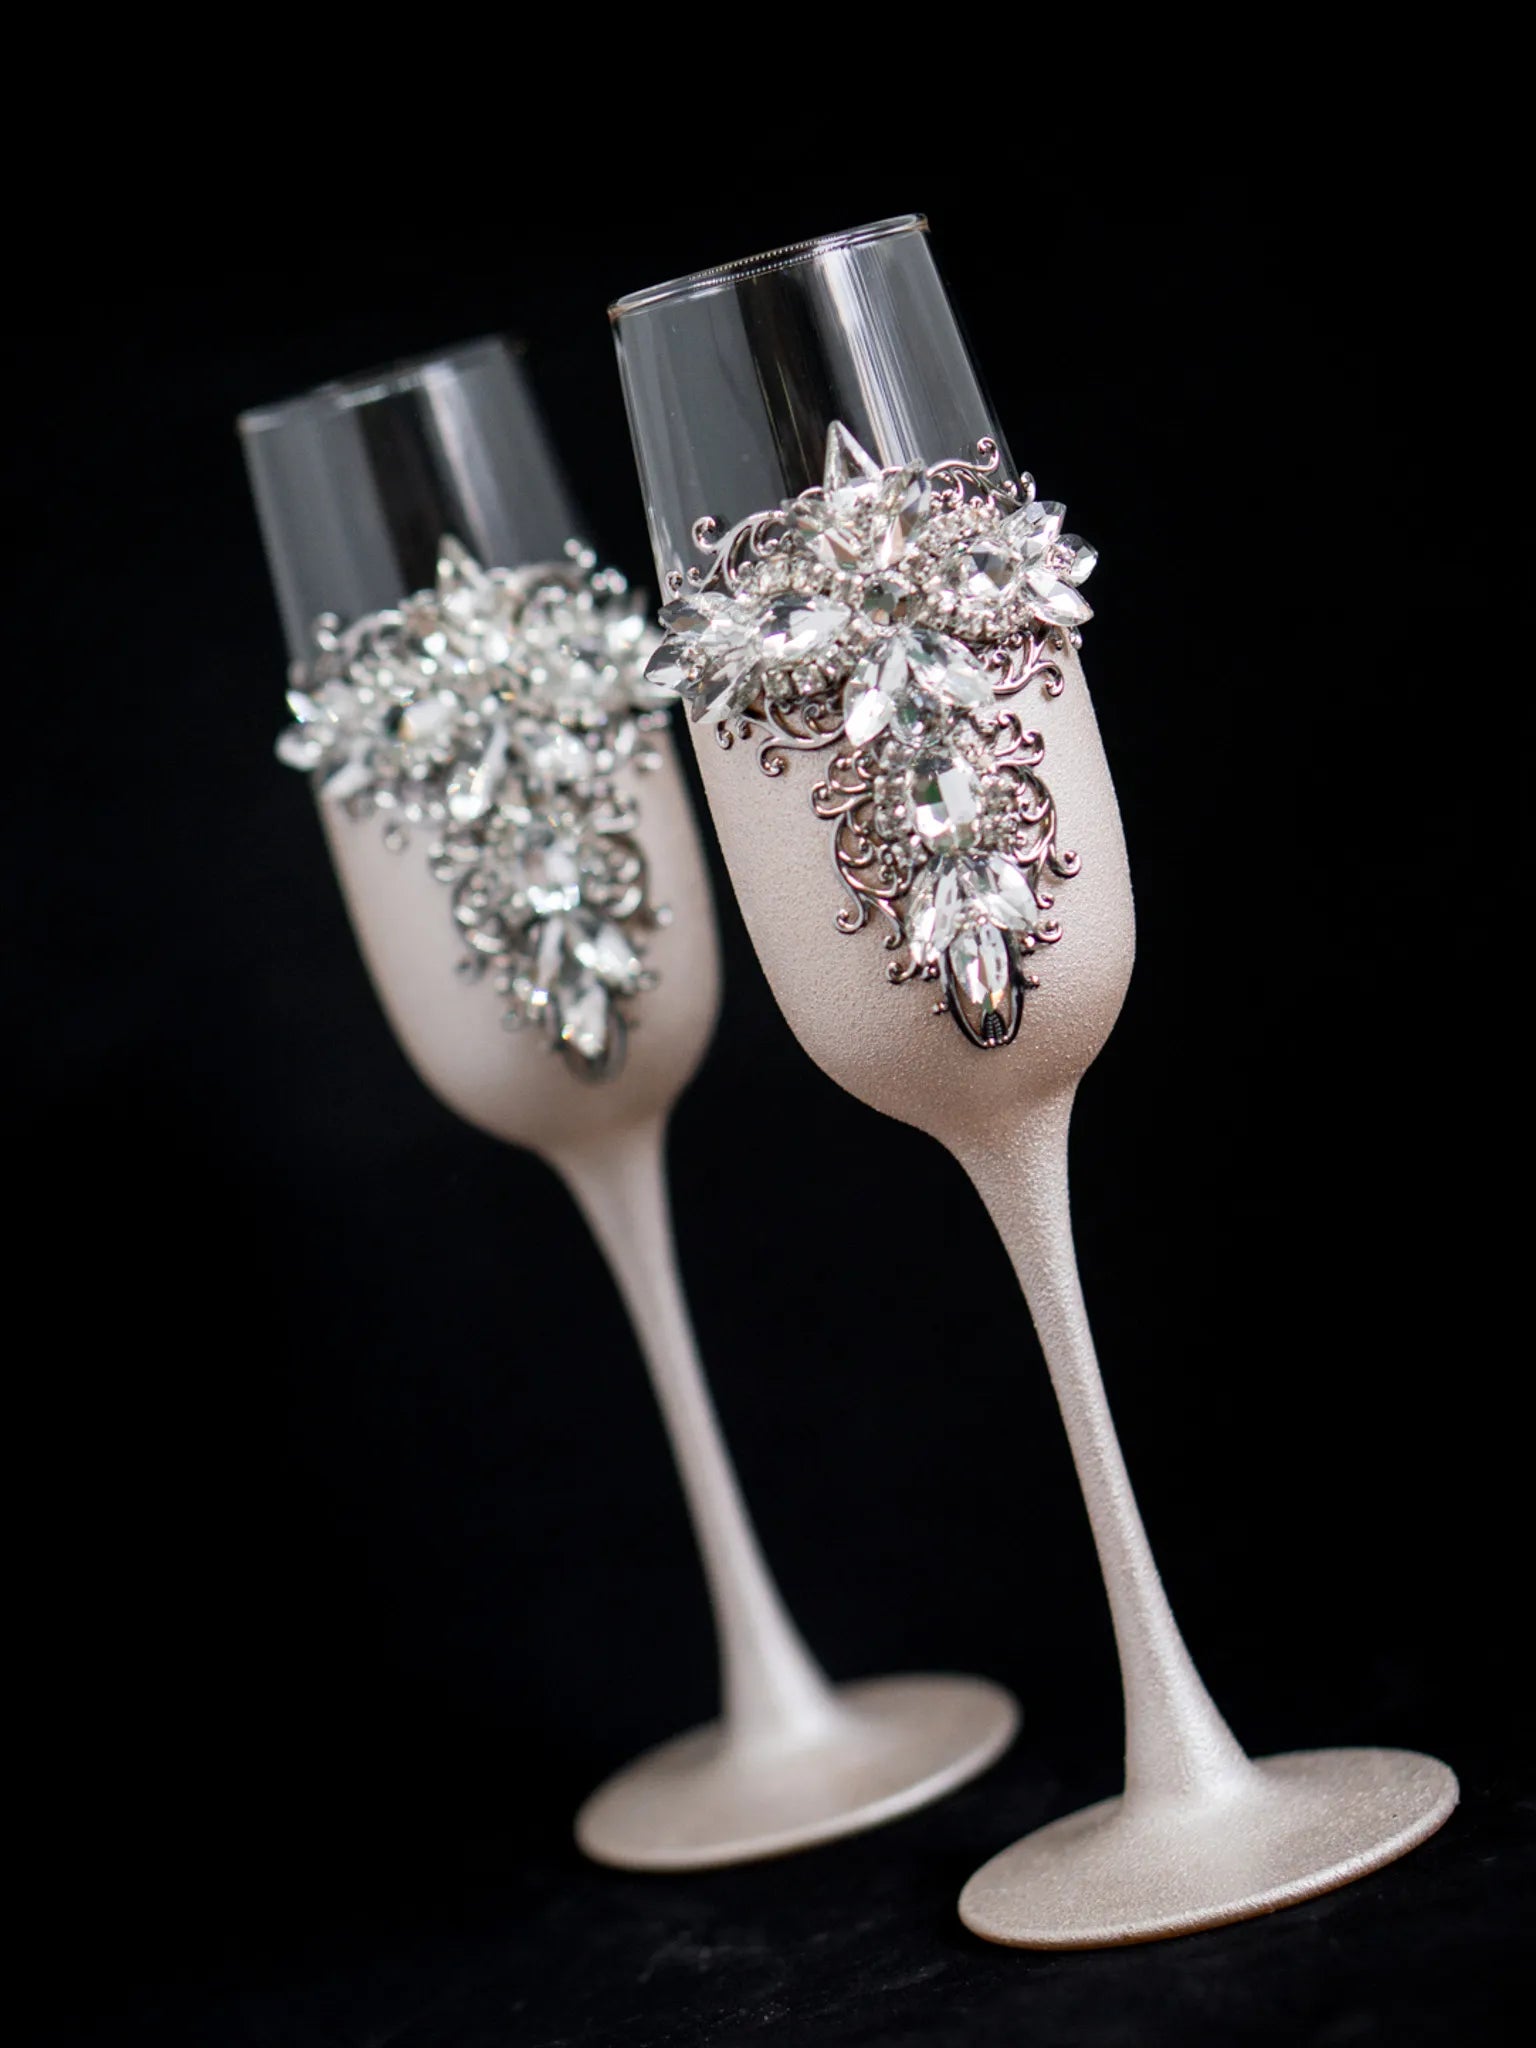 Silver and Ivory Wedding Glasses and Cake Cutting Set with Crystals